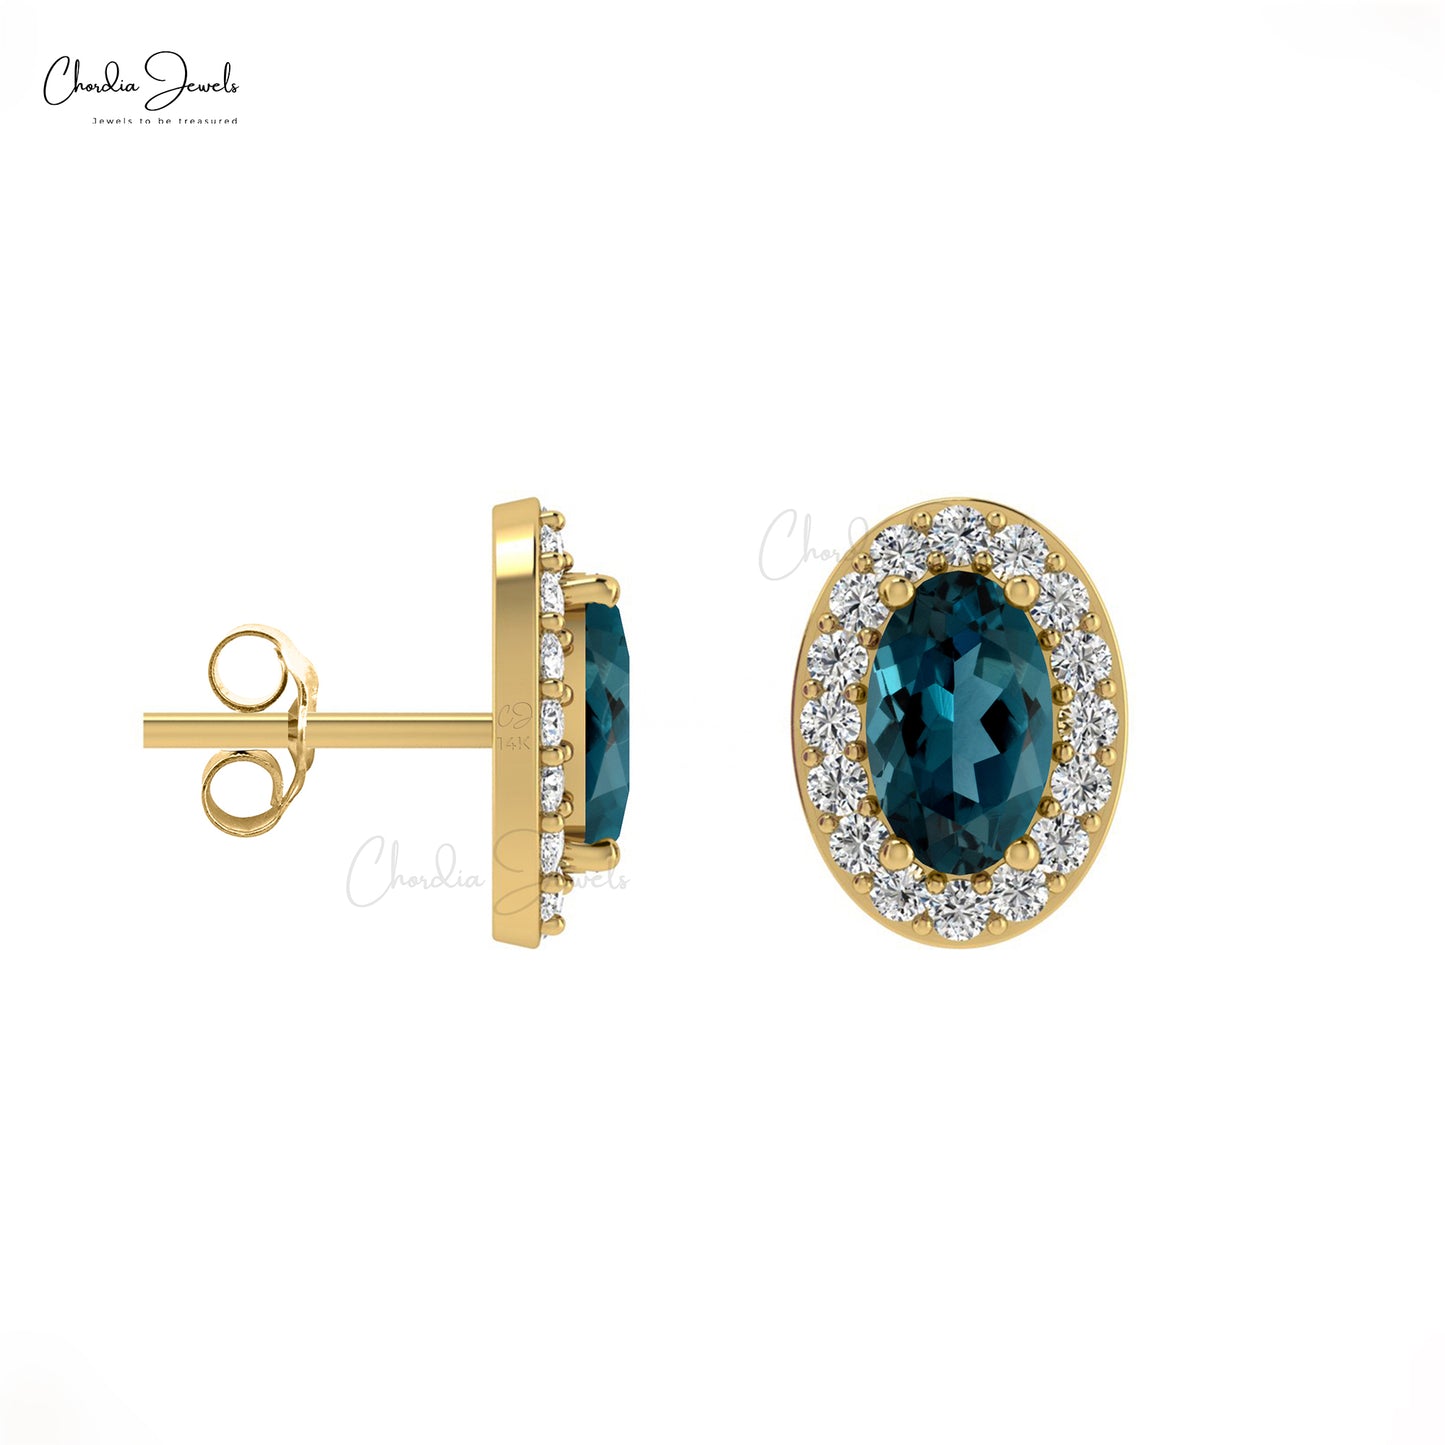 Solid 14k Gold Diamond Halo Earrings Authentic 5x3mm London Blue Topaz Studs For Wedding Gift